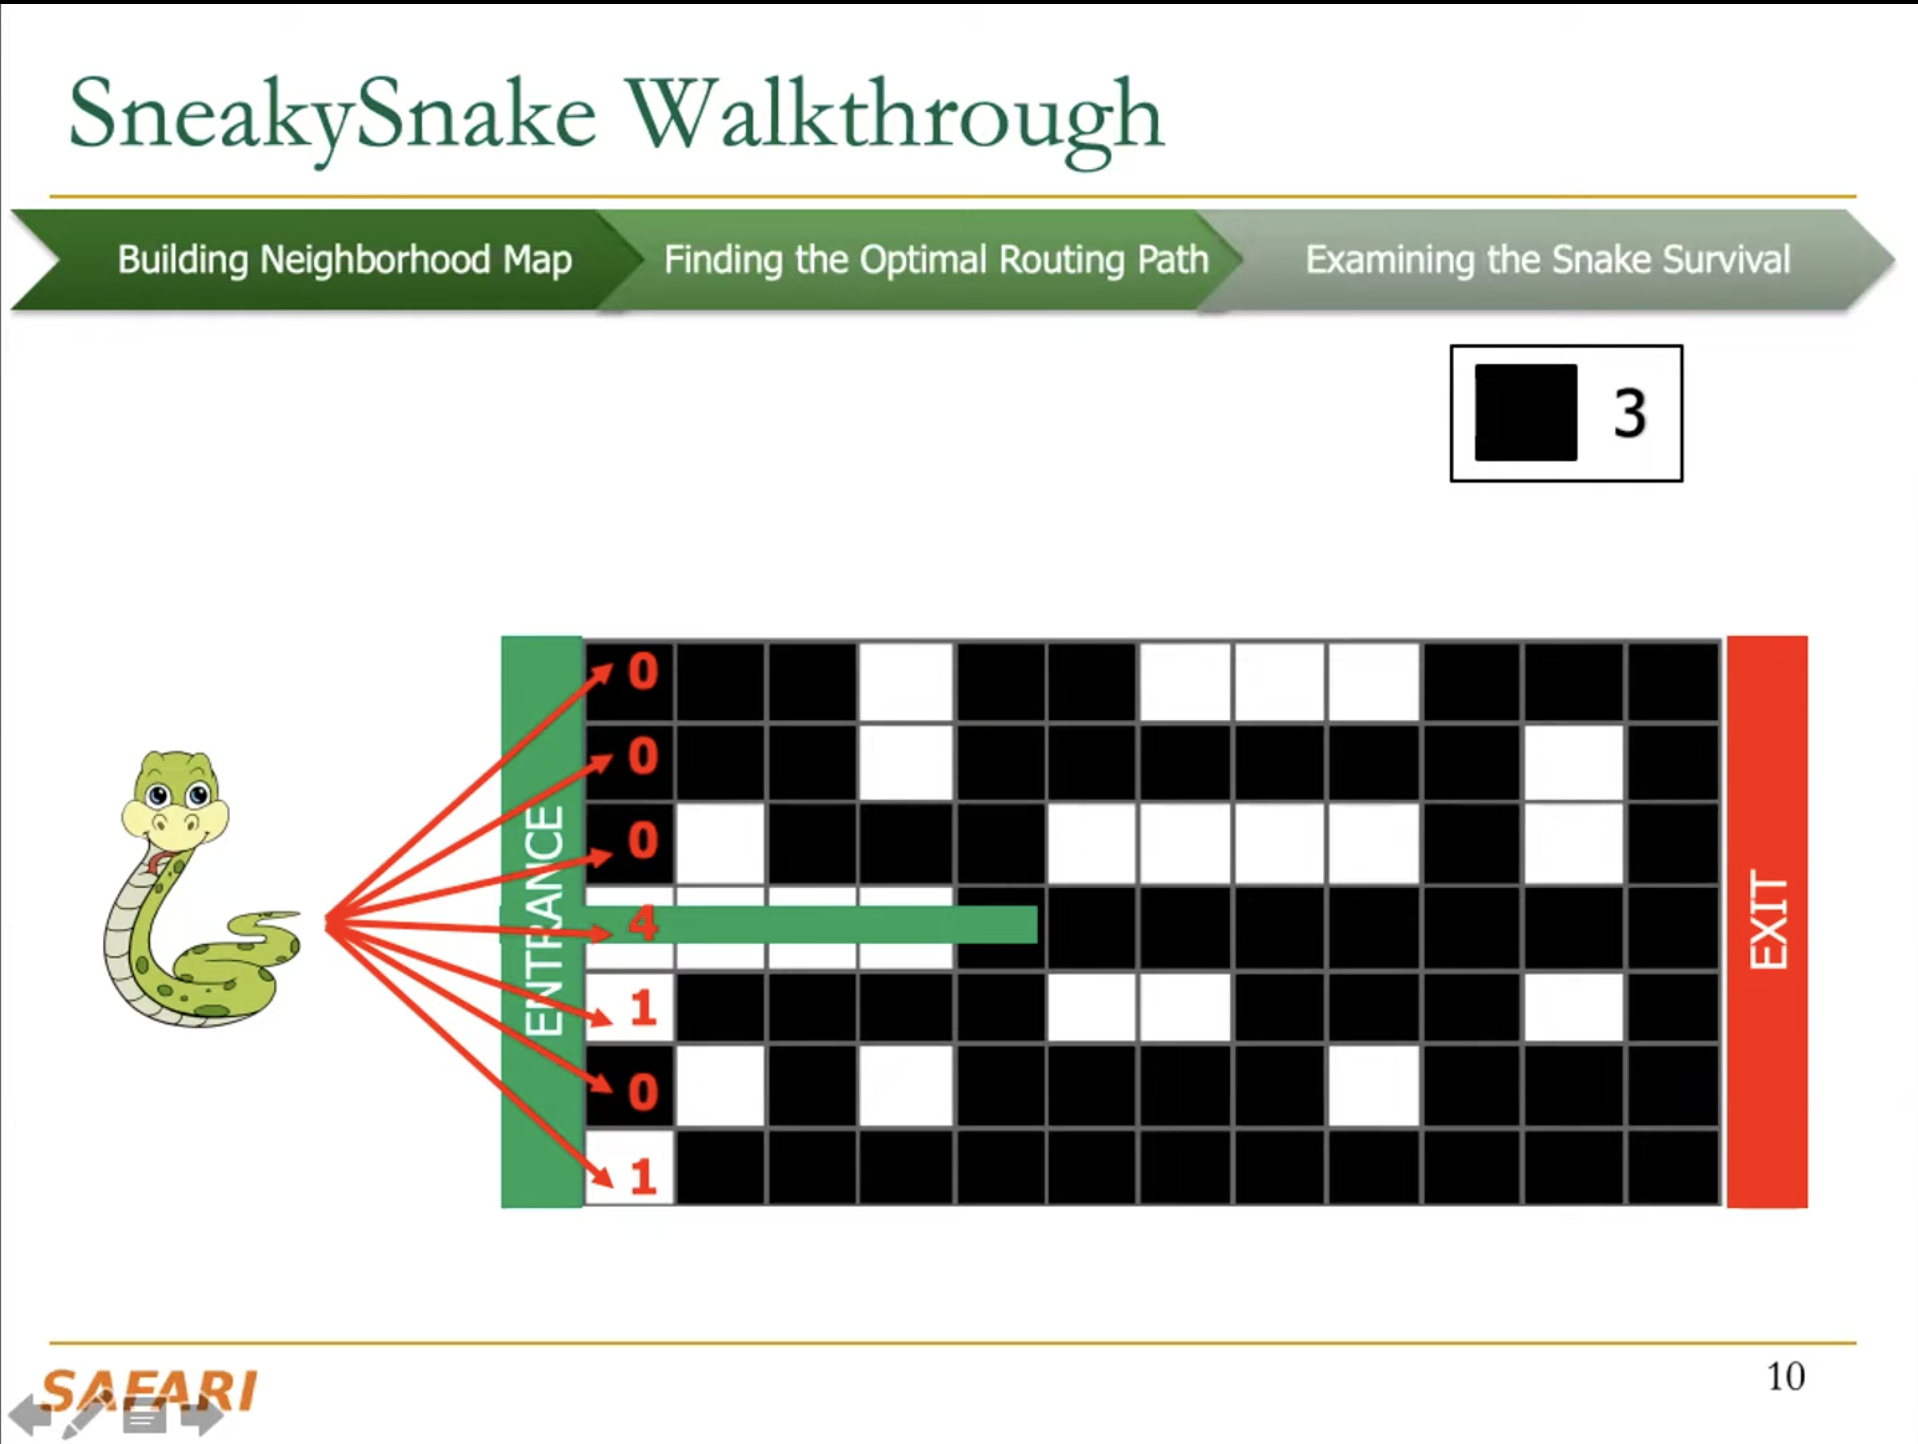 Watch our explanation of SneakySnake